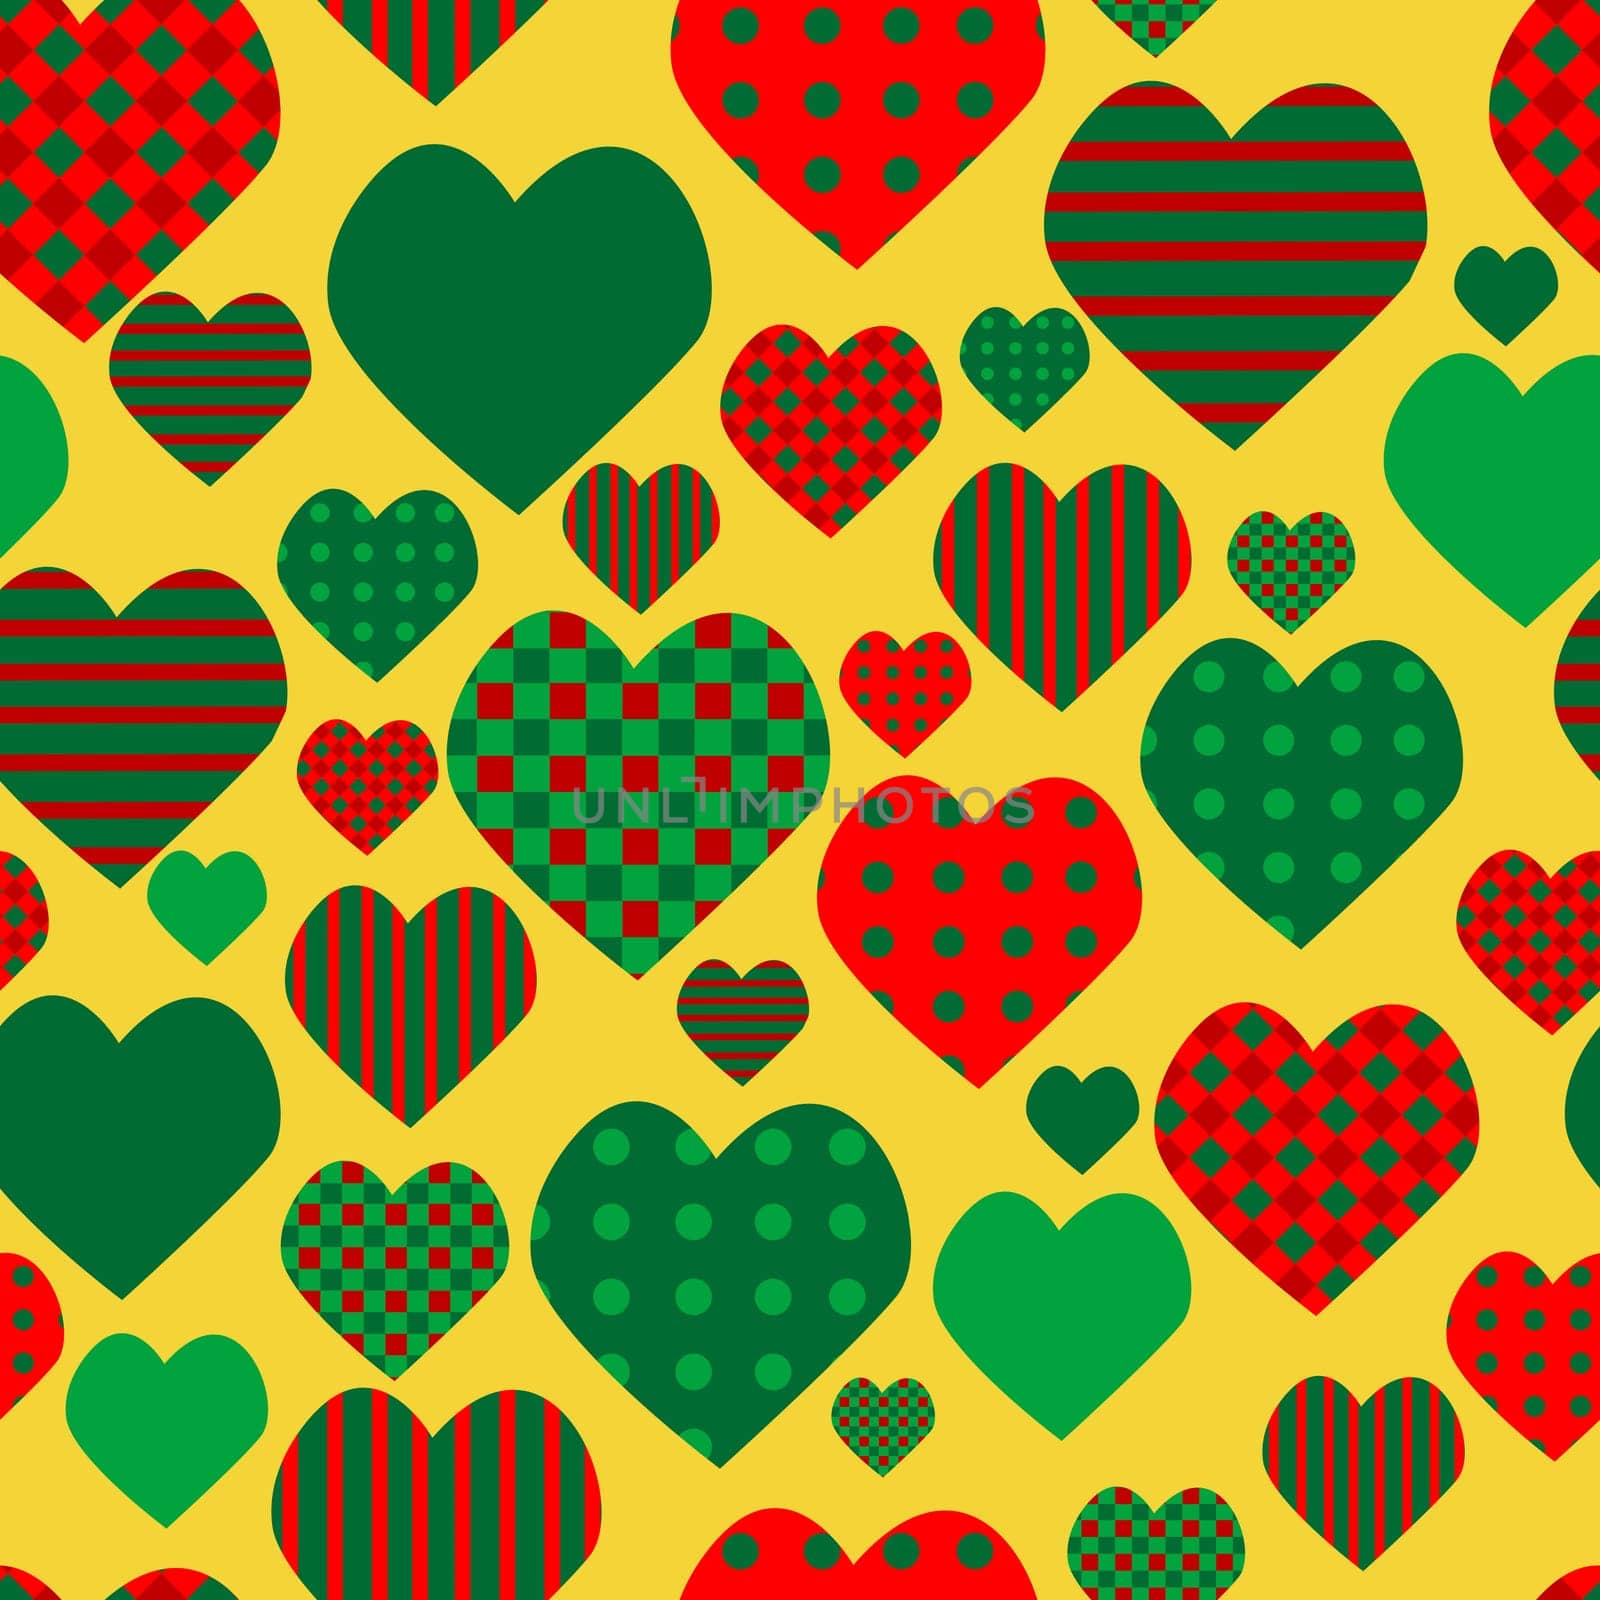 Hearts with different prints in the colors of Christmas wrapping paper